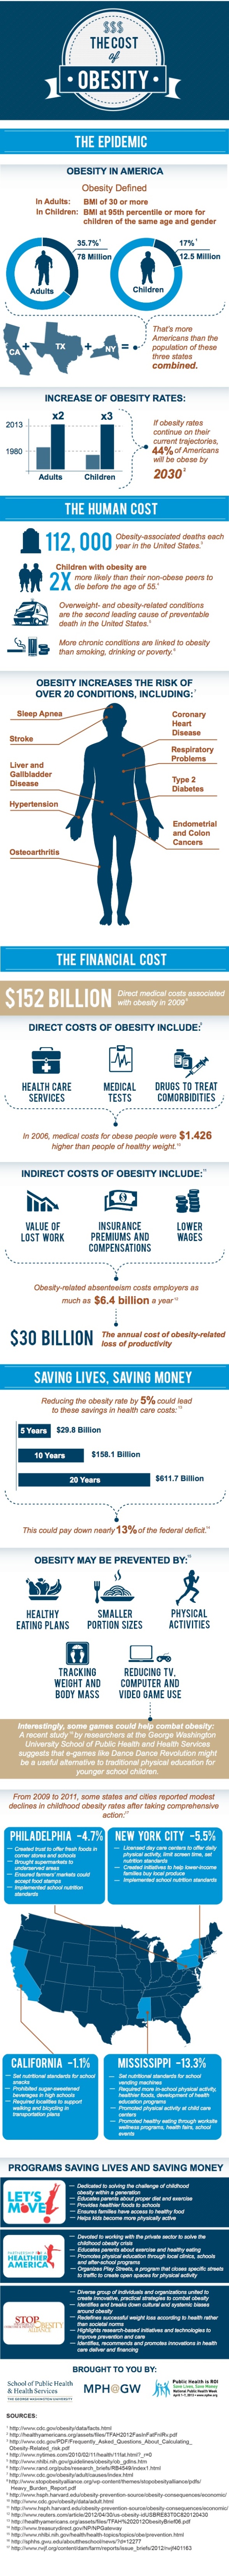 Costs Of Obesity In America